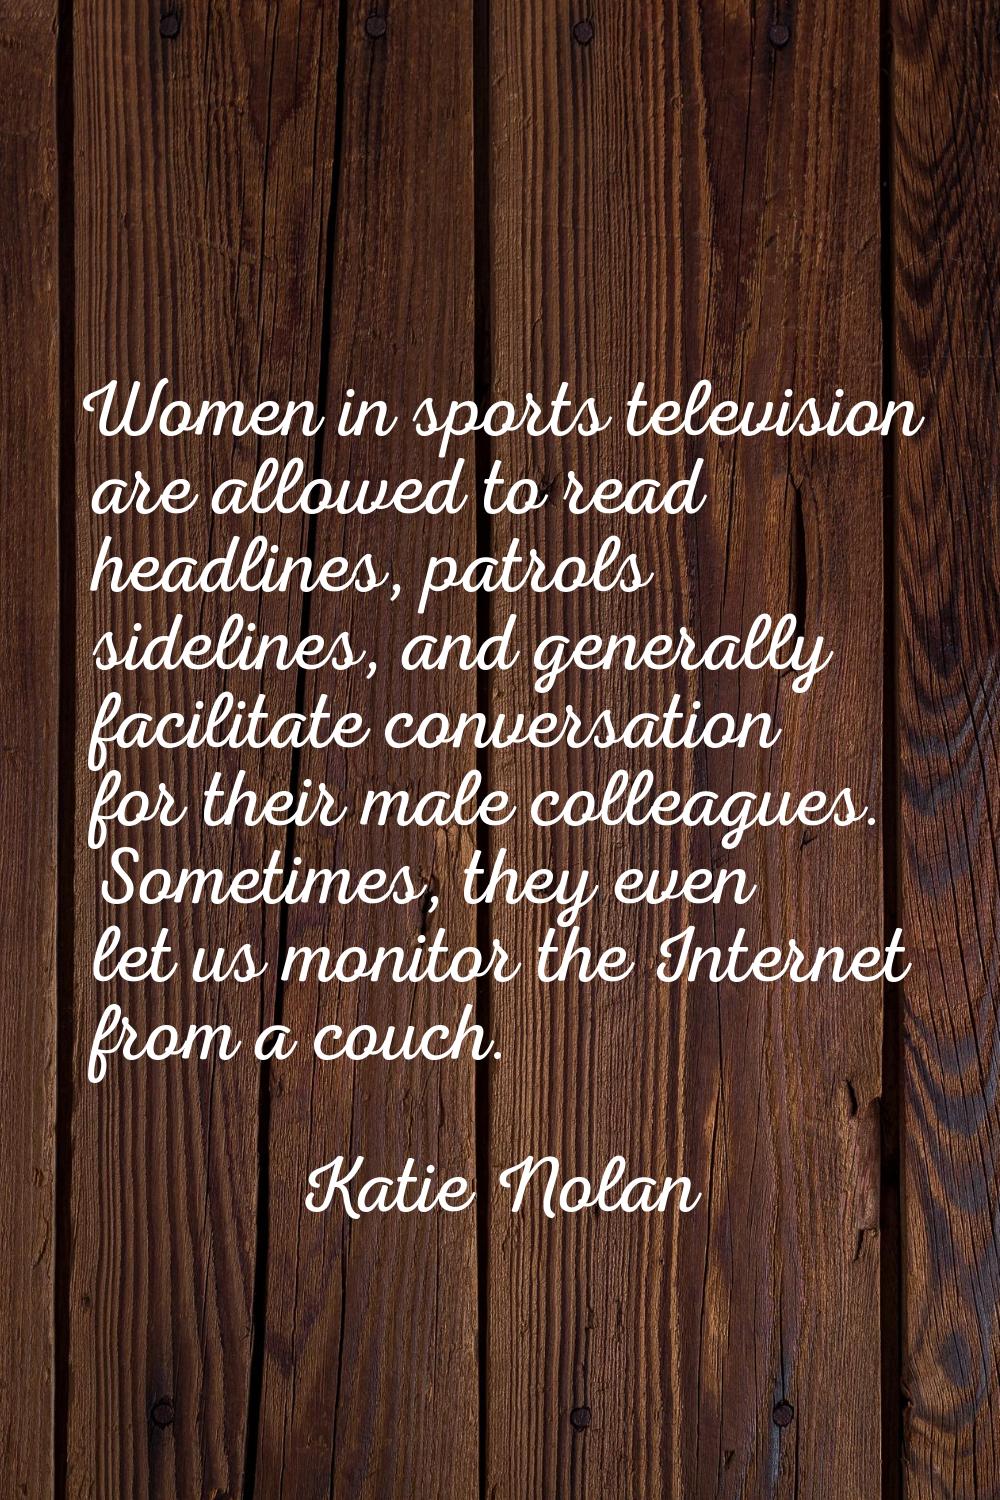 Women in sports television are allowed to read headlines, patrols sidelines, and generally facilita